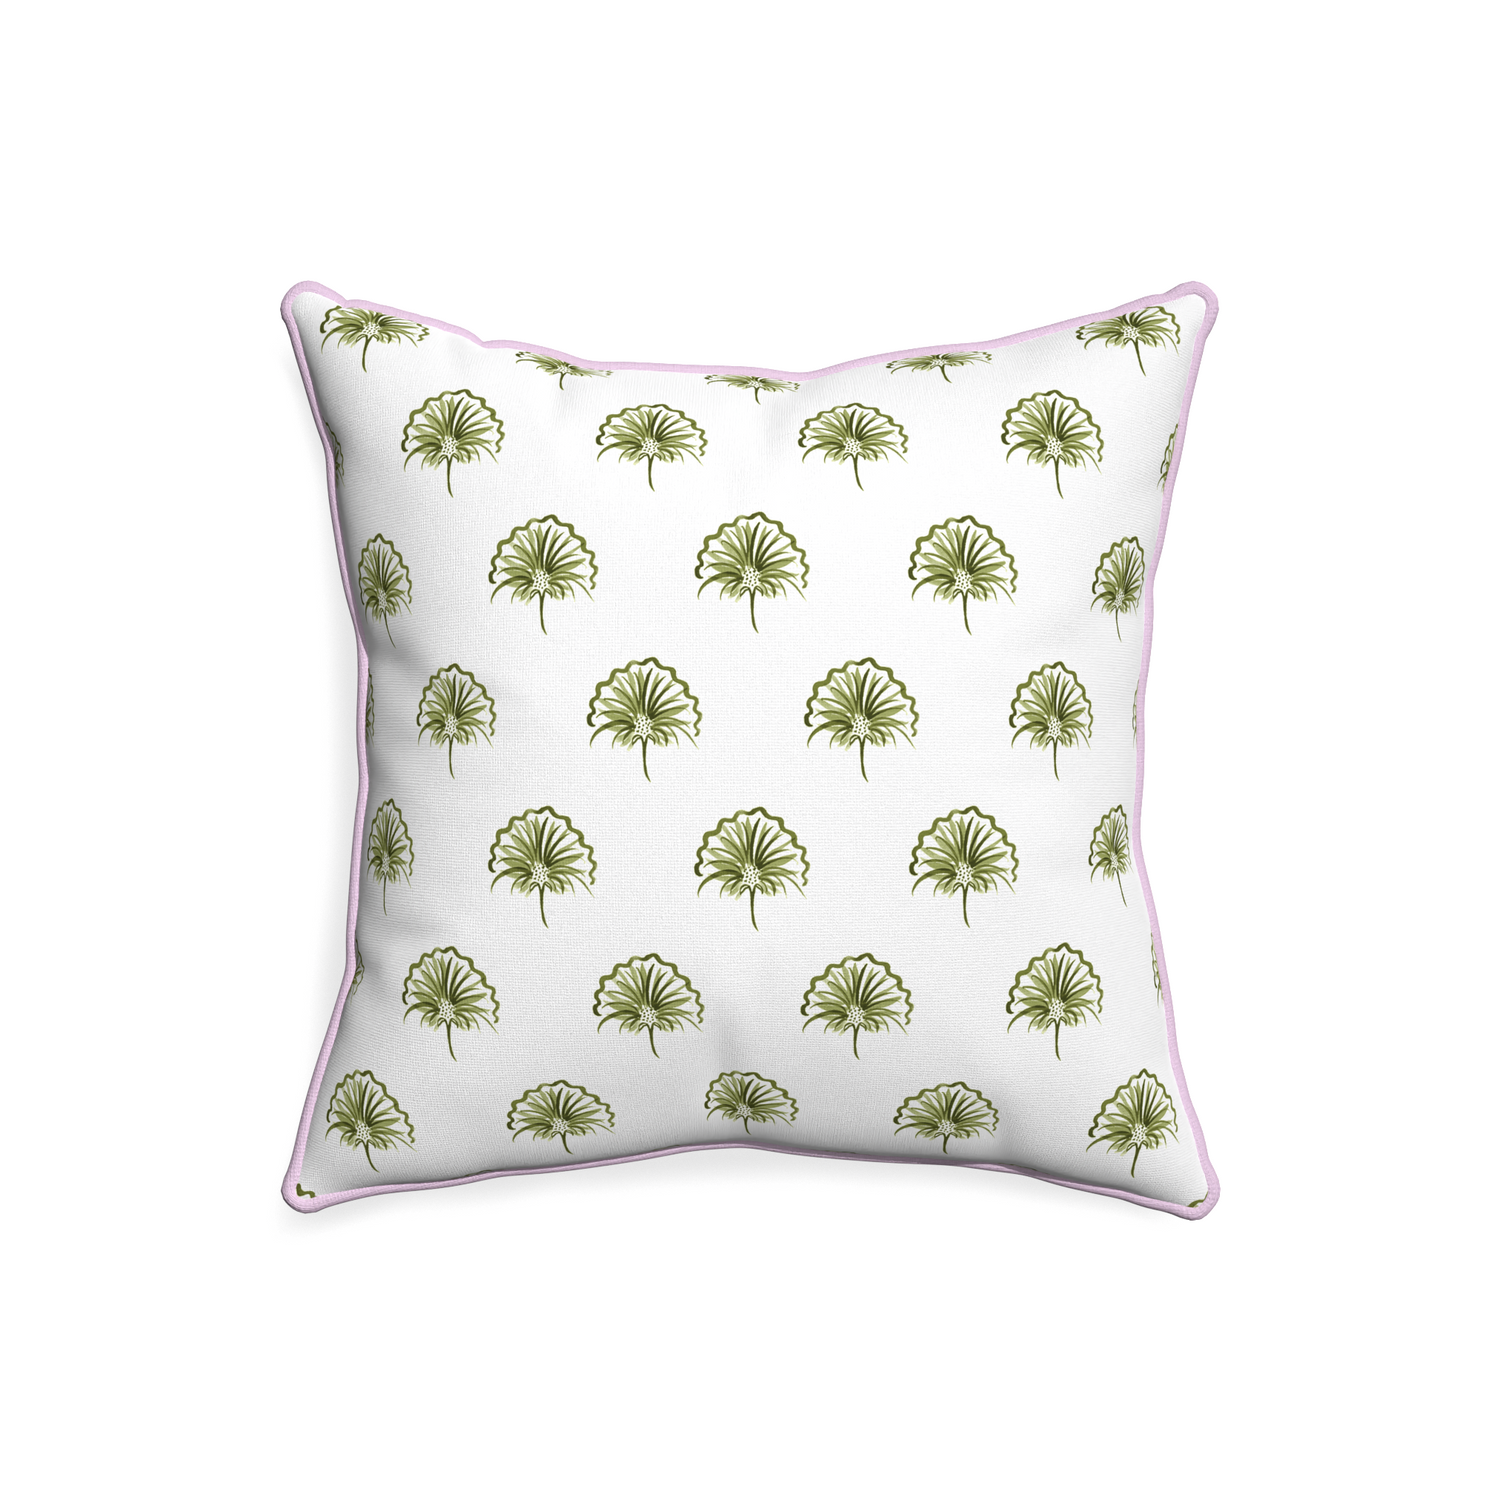 20-square penelope moss custom green floralpillow with l piping on white background